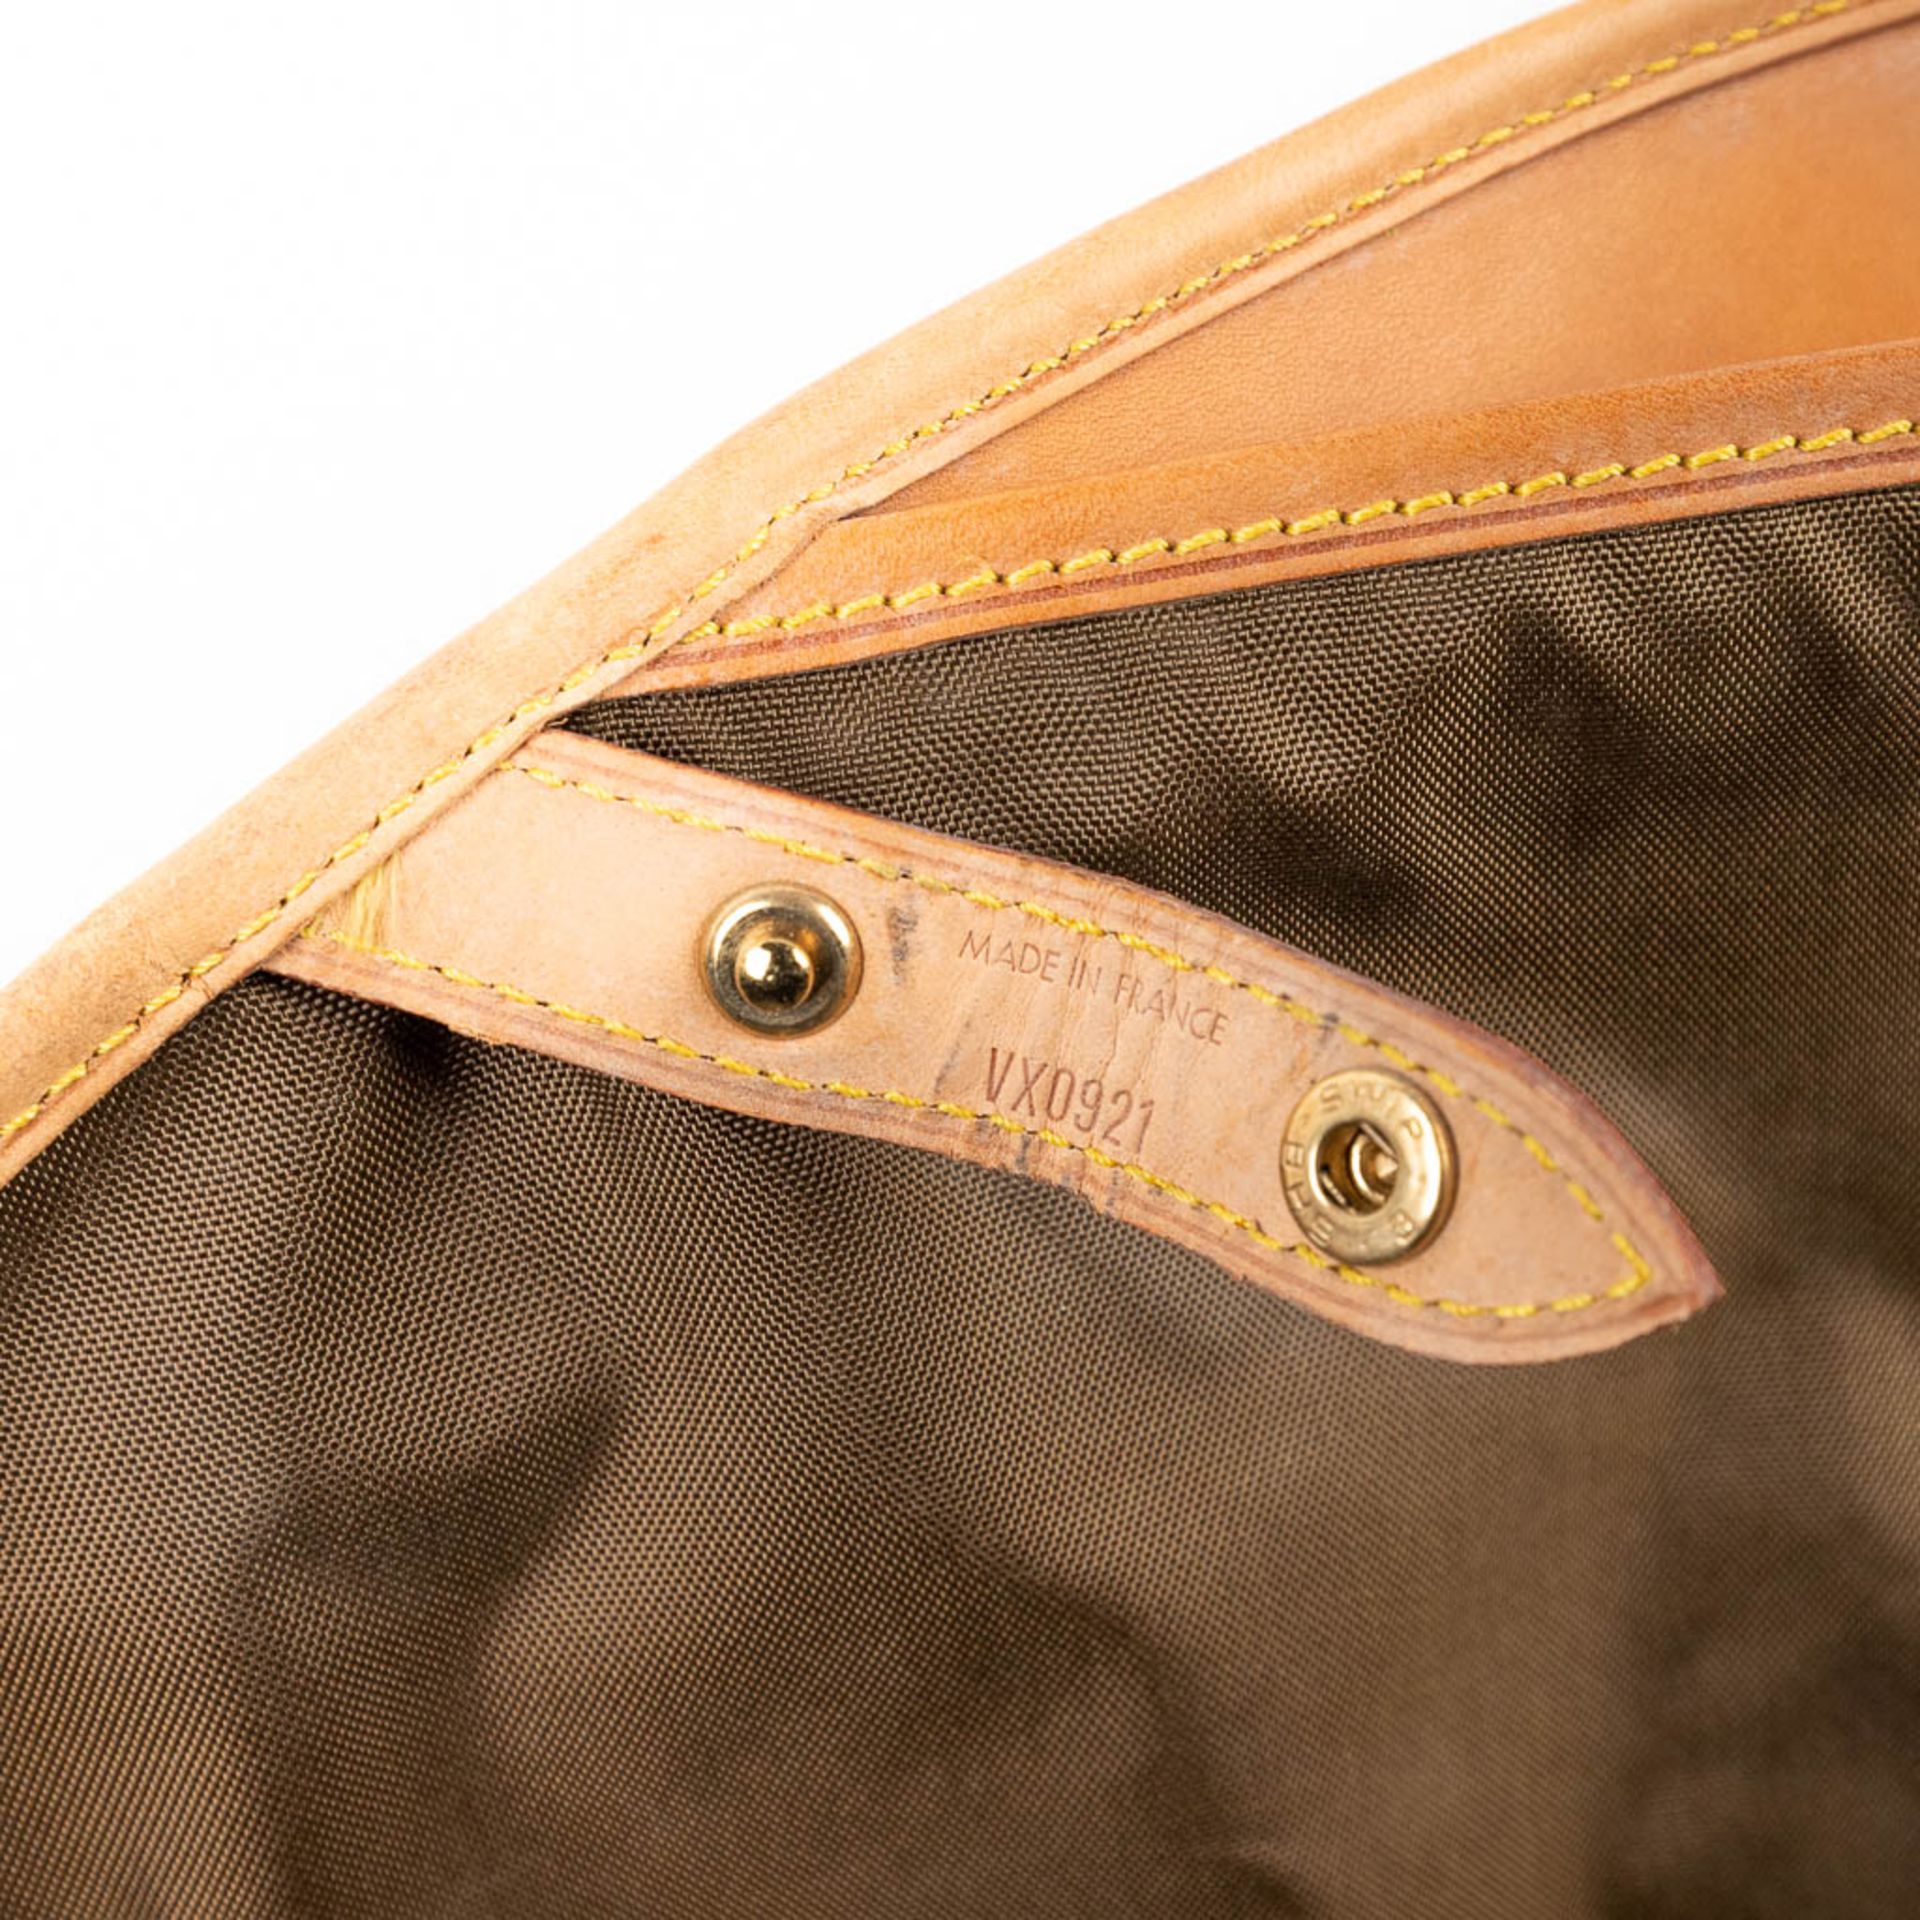 A garment suit traveller's bag made of leather by Louis Vuitton. (H:70cm) - Image 10 of 13